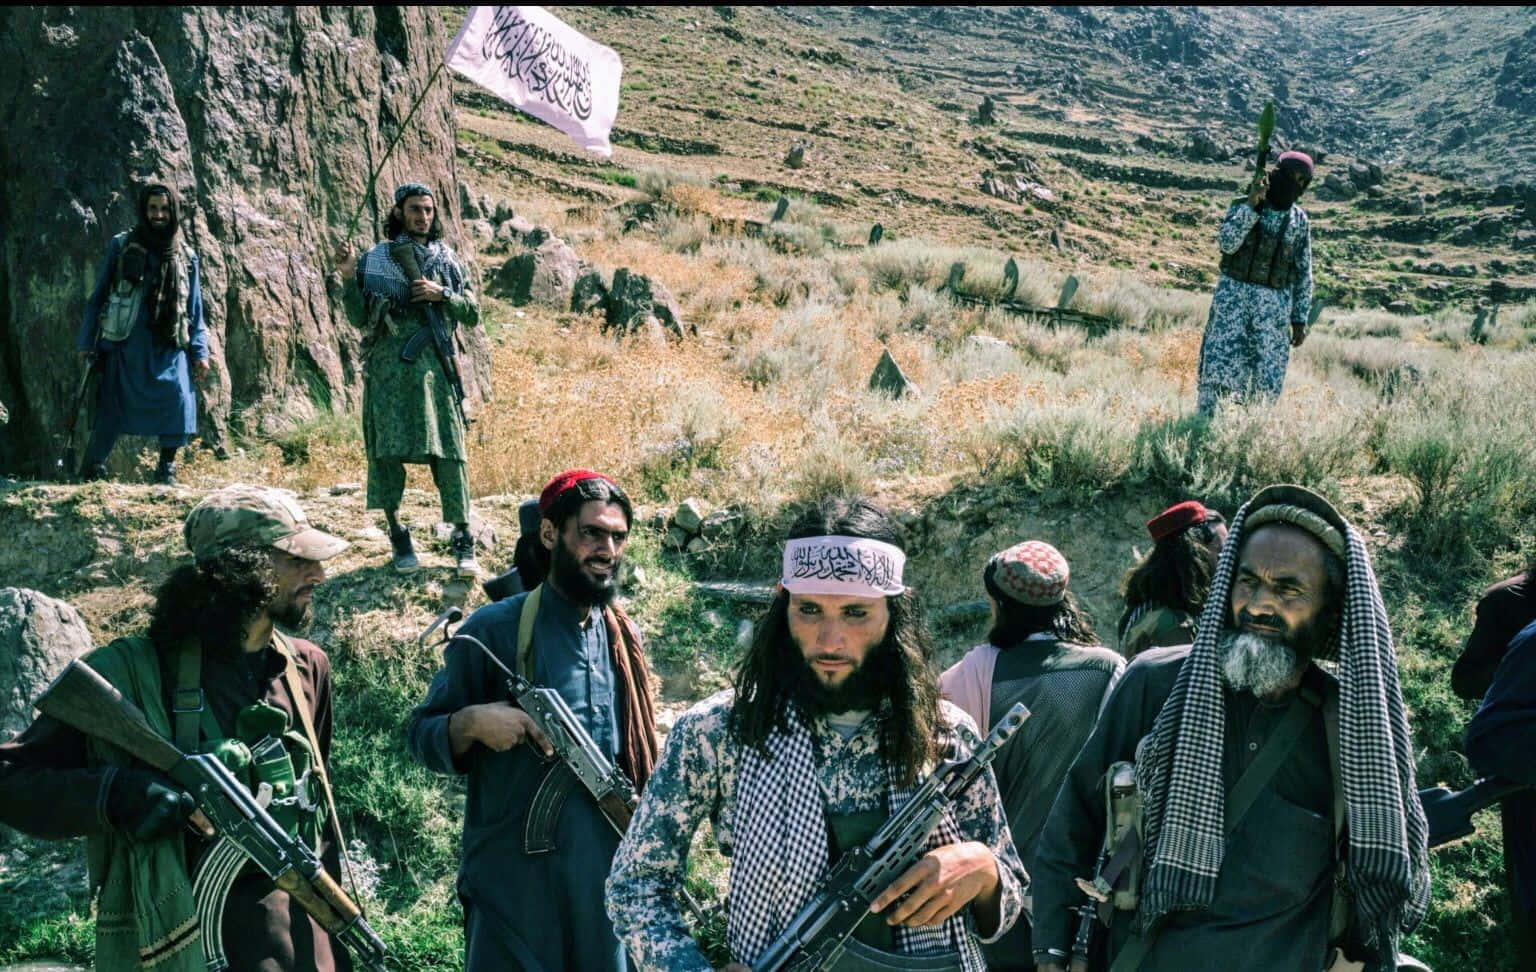 Taliban fighters posing with weapons